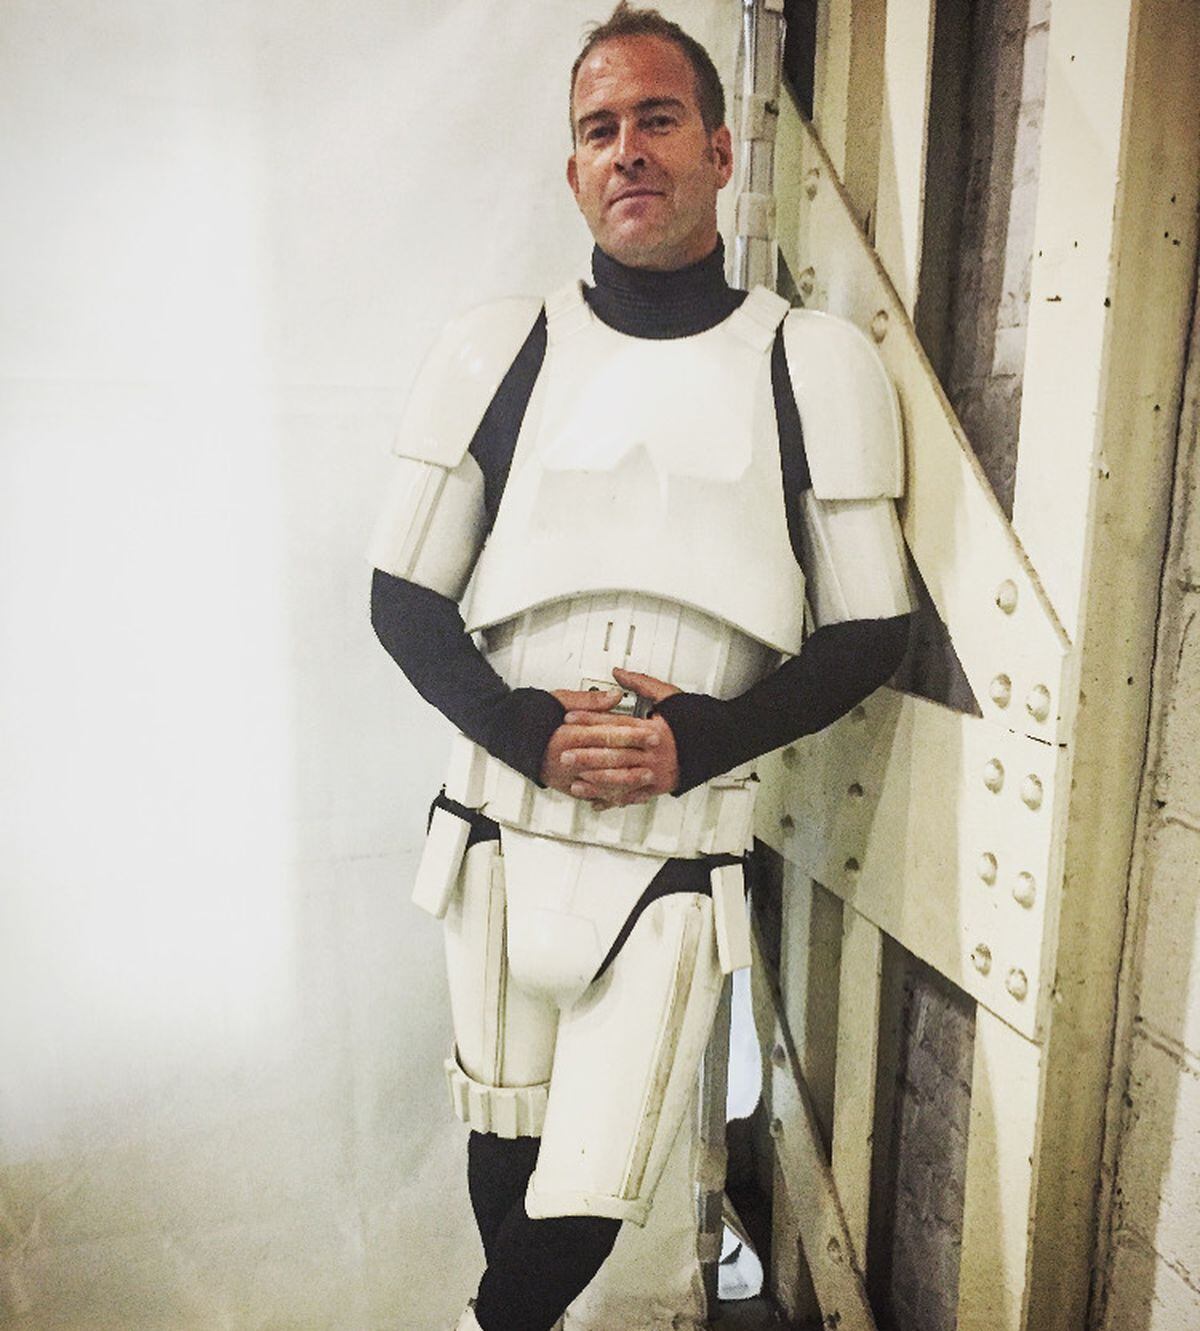 A day as a stormtrooper on the set of Star Wars movie Rogue One